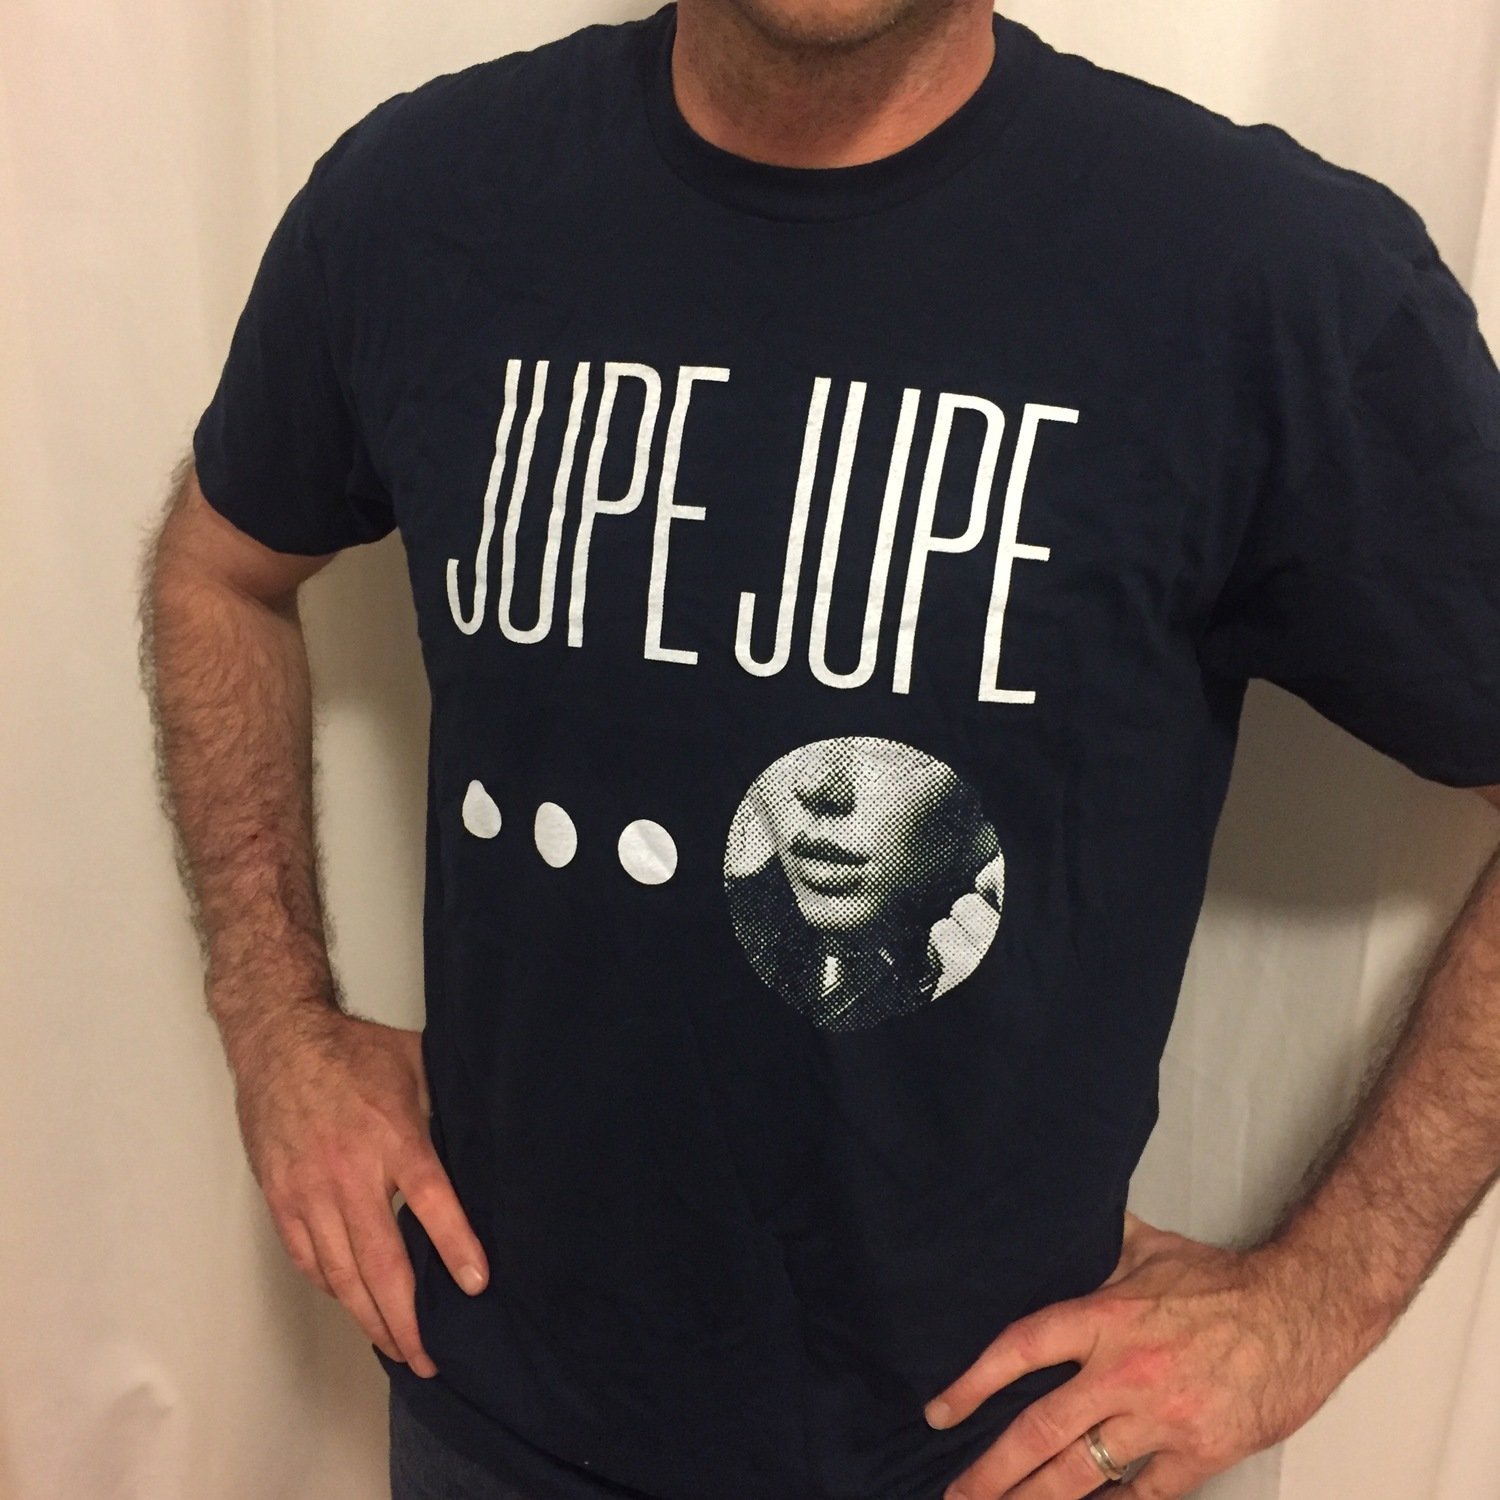 Jupe Jupe "Talking" Mens t-shirt (limited sizes in stock)